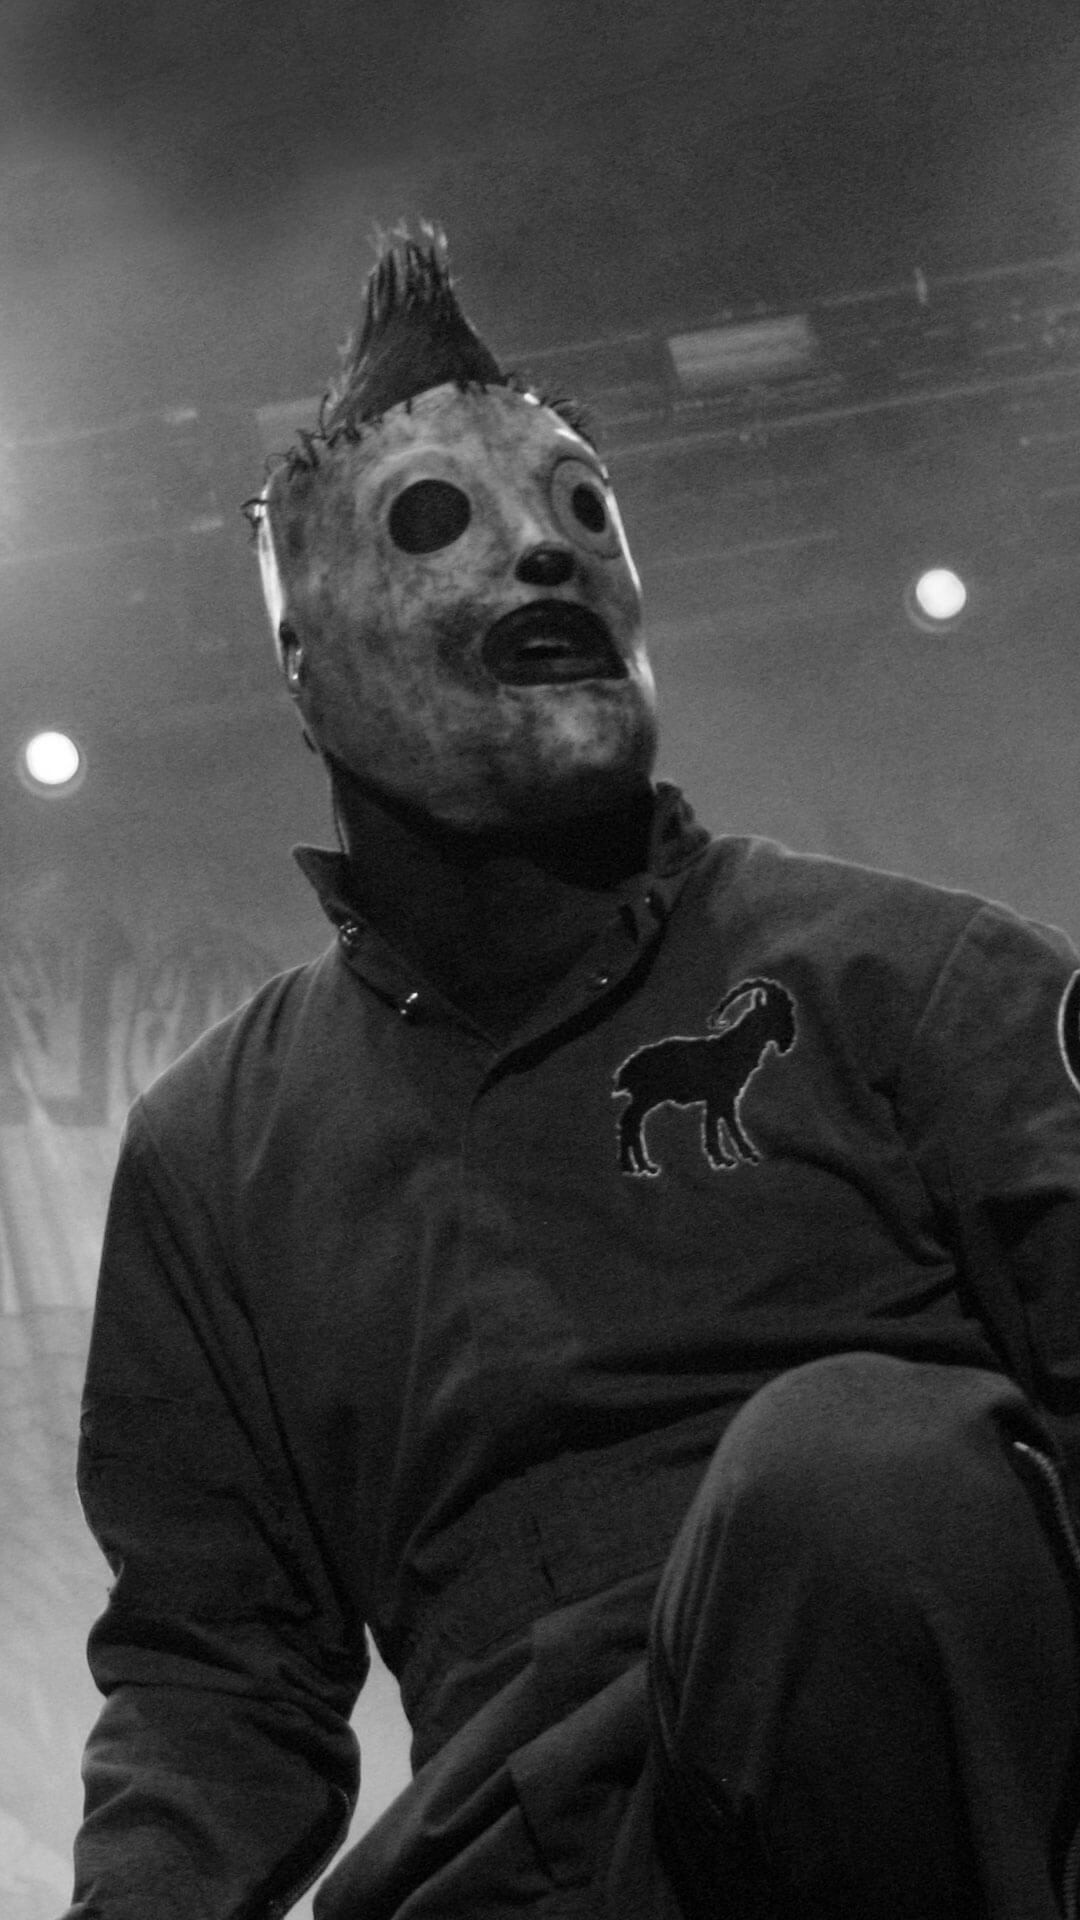 1080x1920 Slipknot Wallpapers for Iphone 7, Iphone 7 plus, Iphone 6 plus